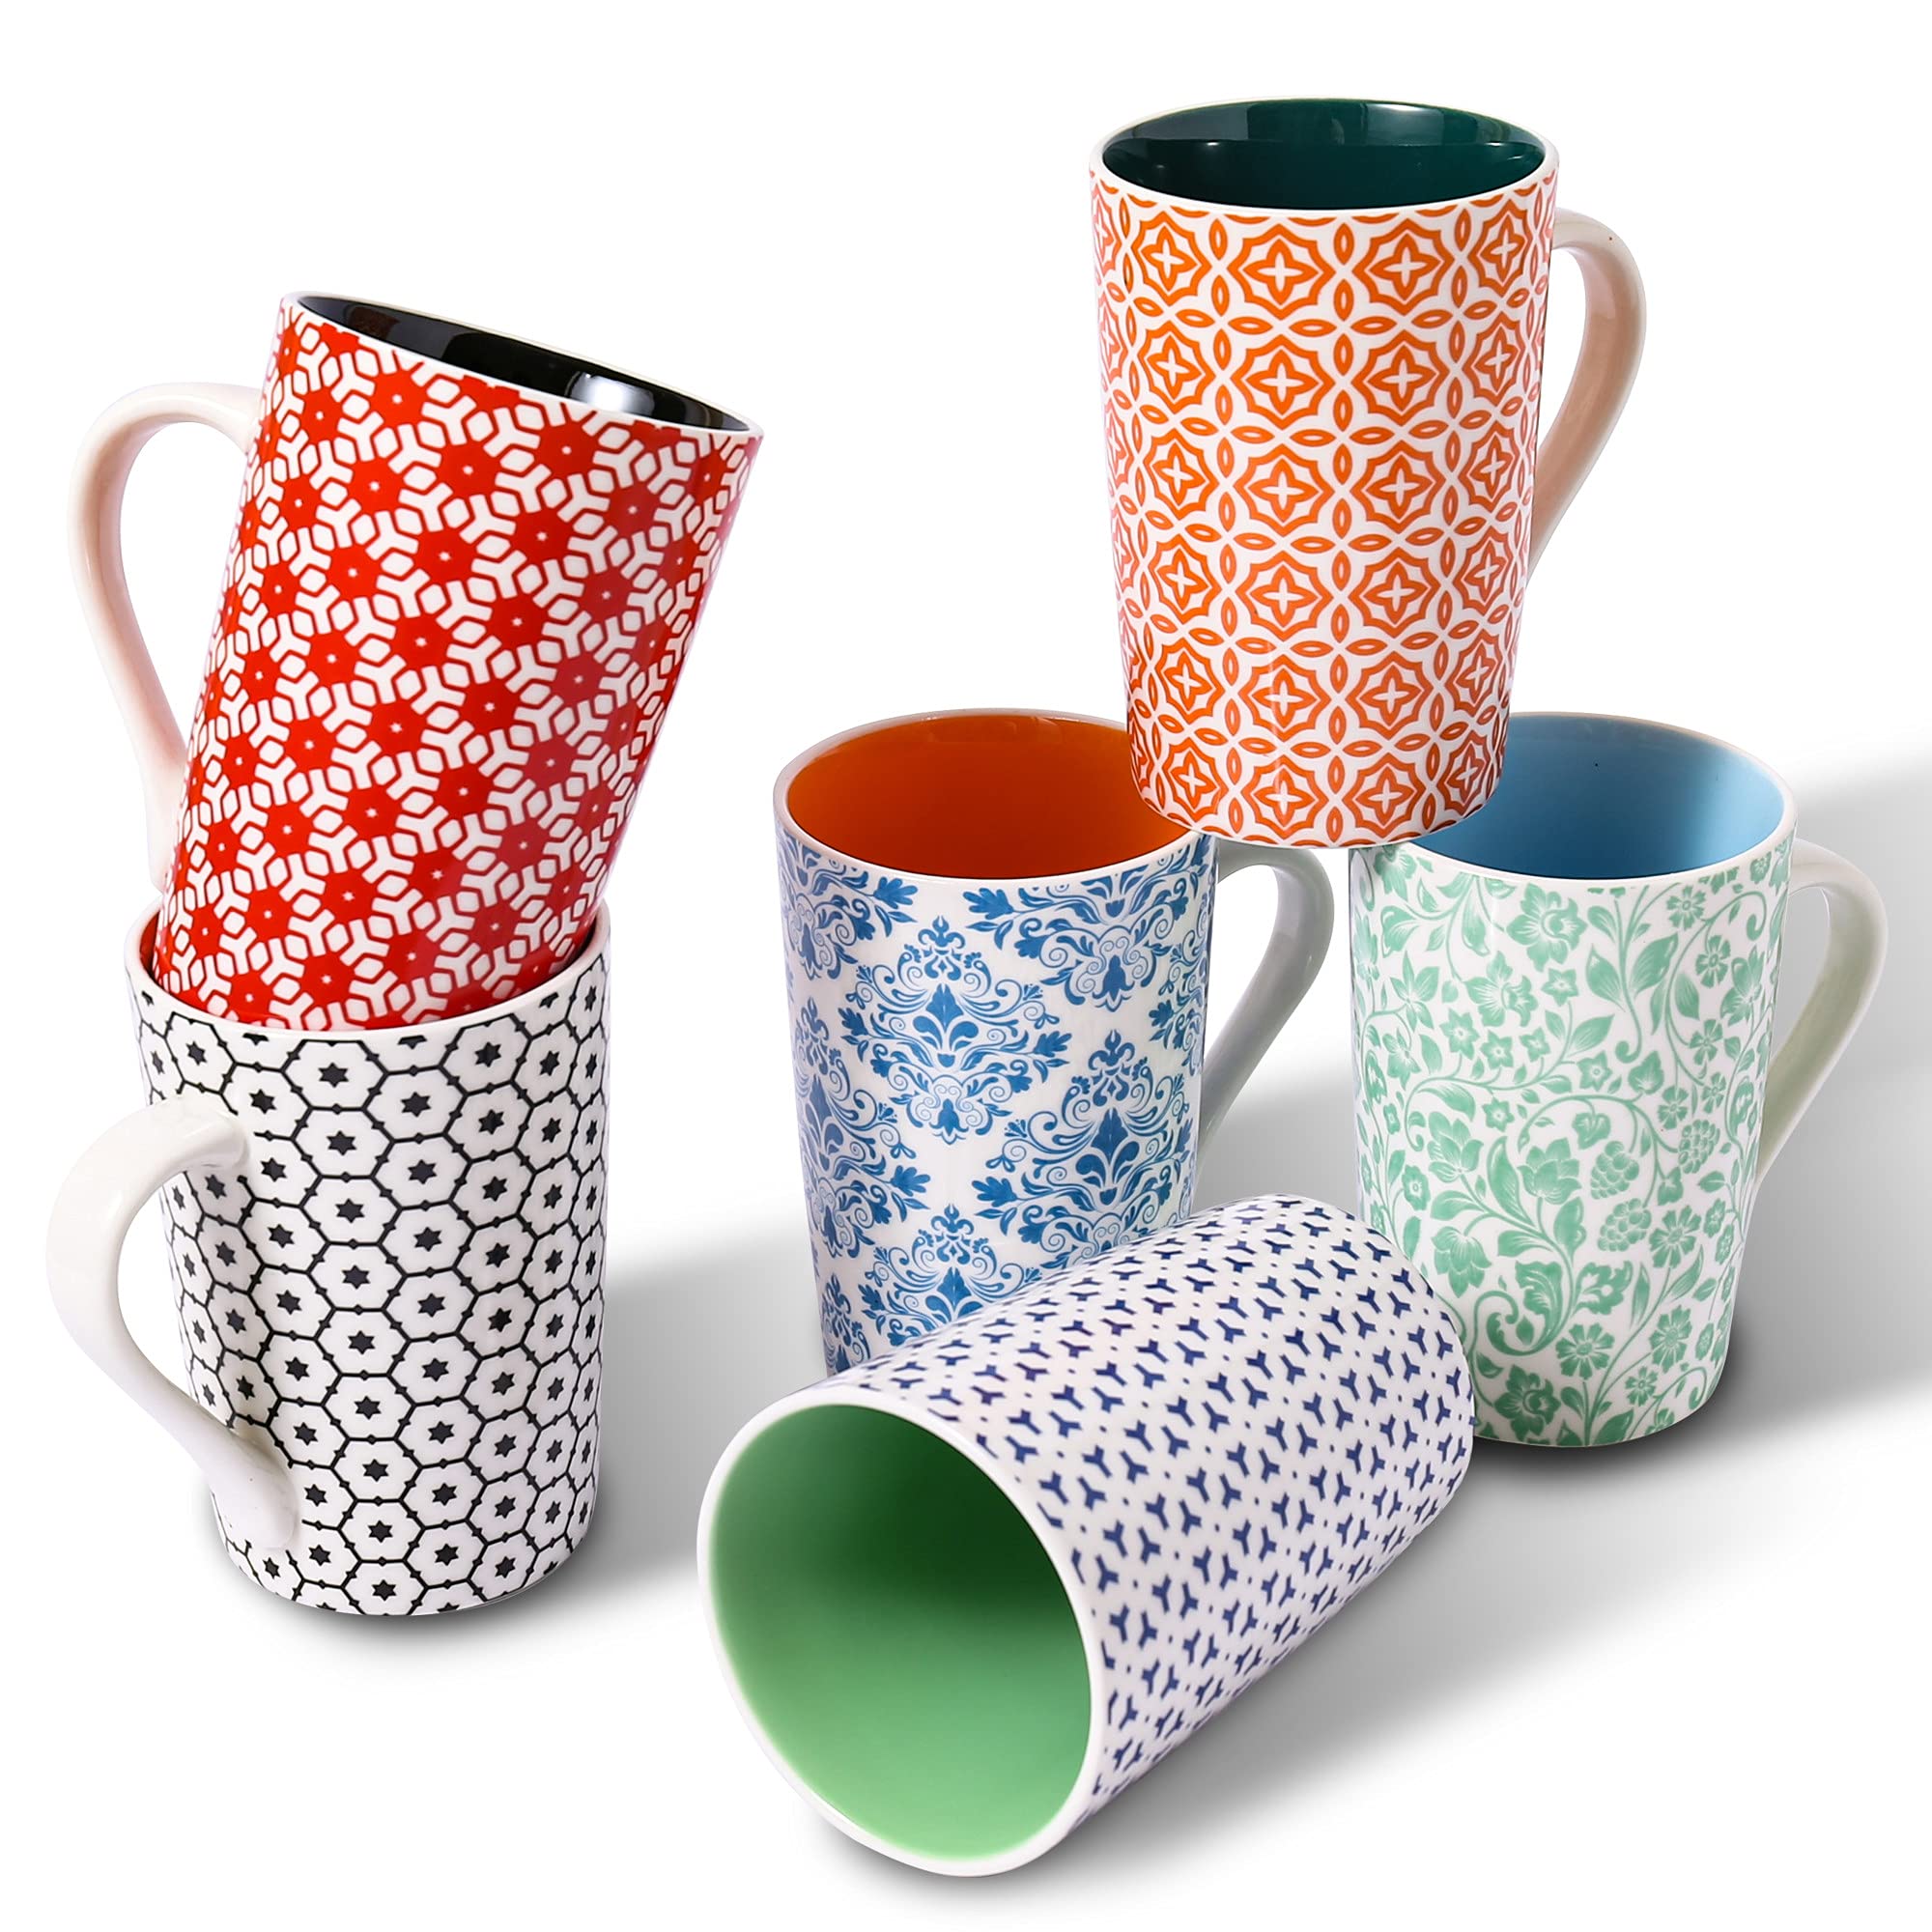 WEUNUM Coffee Mugs, Set of 6,Modern Colorful 14 Oz Cute Porcelain Mugs/Cups with Large Handle,for Tea,Latte,Cappuccino,Milk,Cocoa, Coffee Cups for Women Men, Vibrant Colors